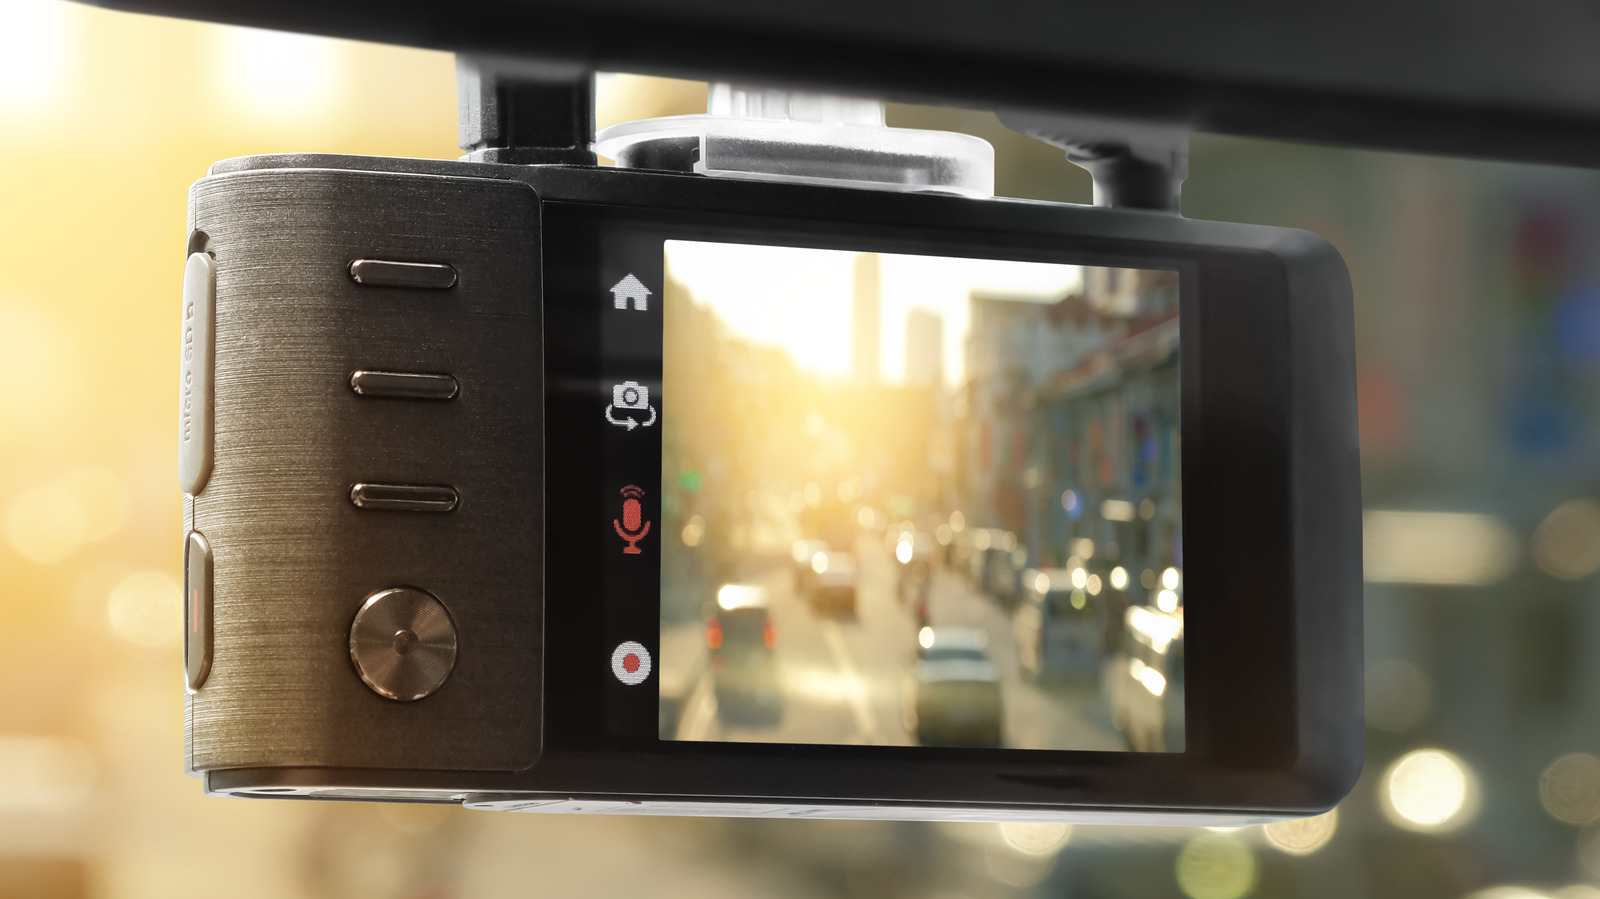 https://www.slashgear.com/img/gallery/5-things-to-consider-when-buying-a-dashcam-for-your-car/l-intro-1701546048.jpg